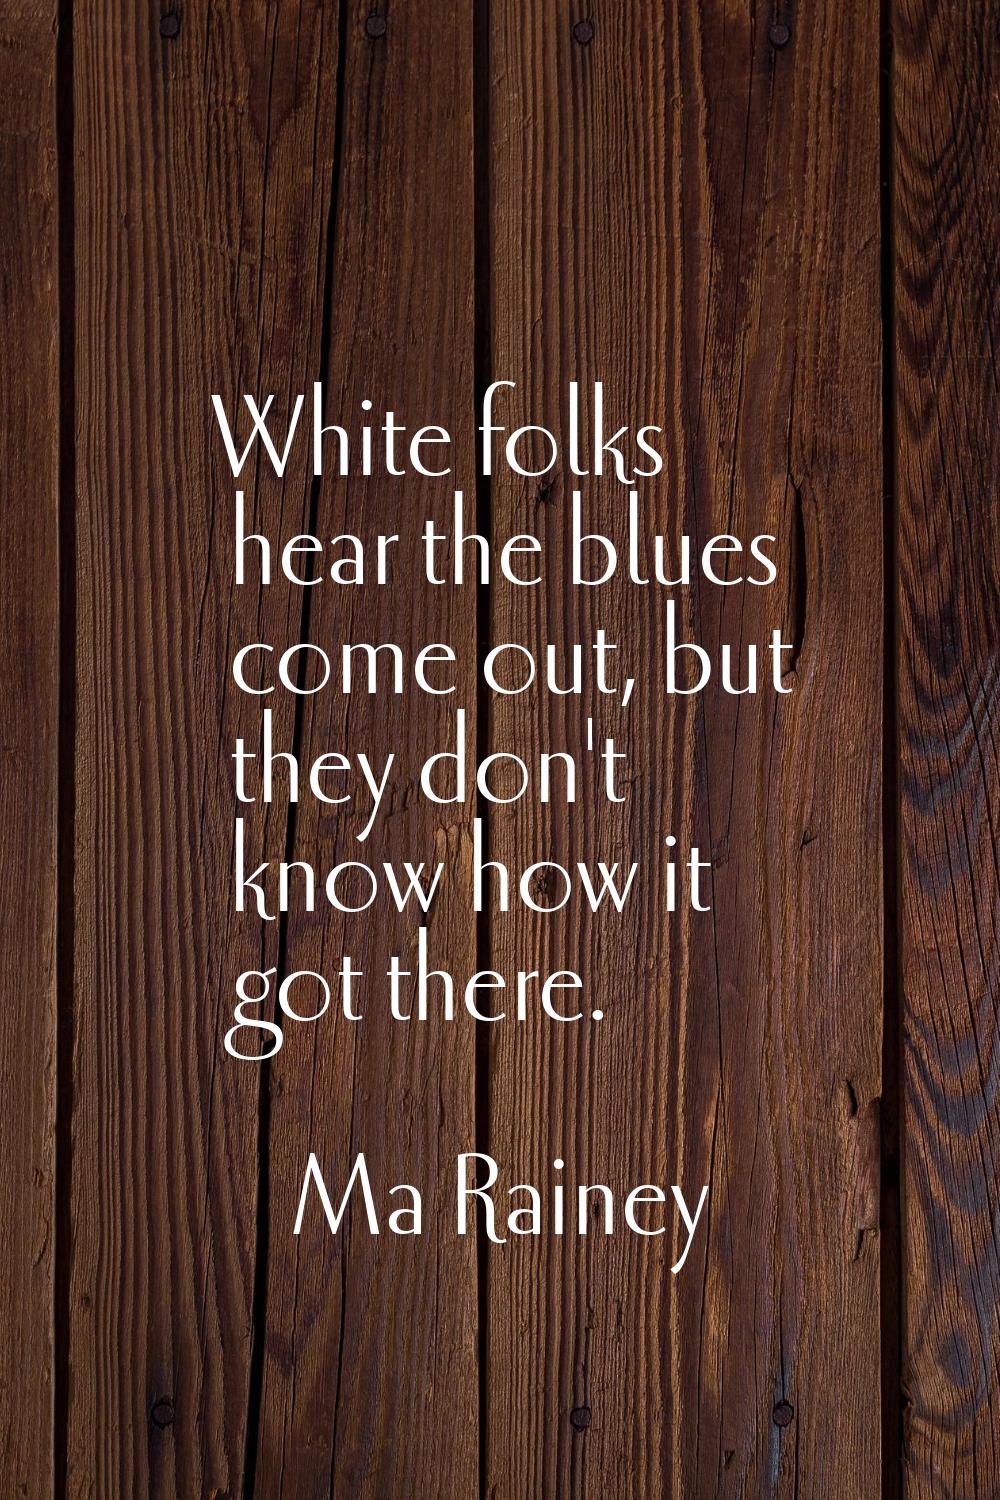 White folks hear the blues come out, but they don't know how it got there.